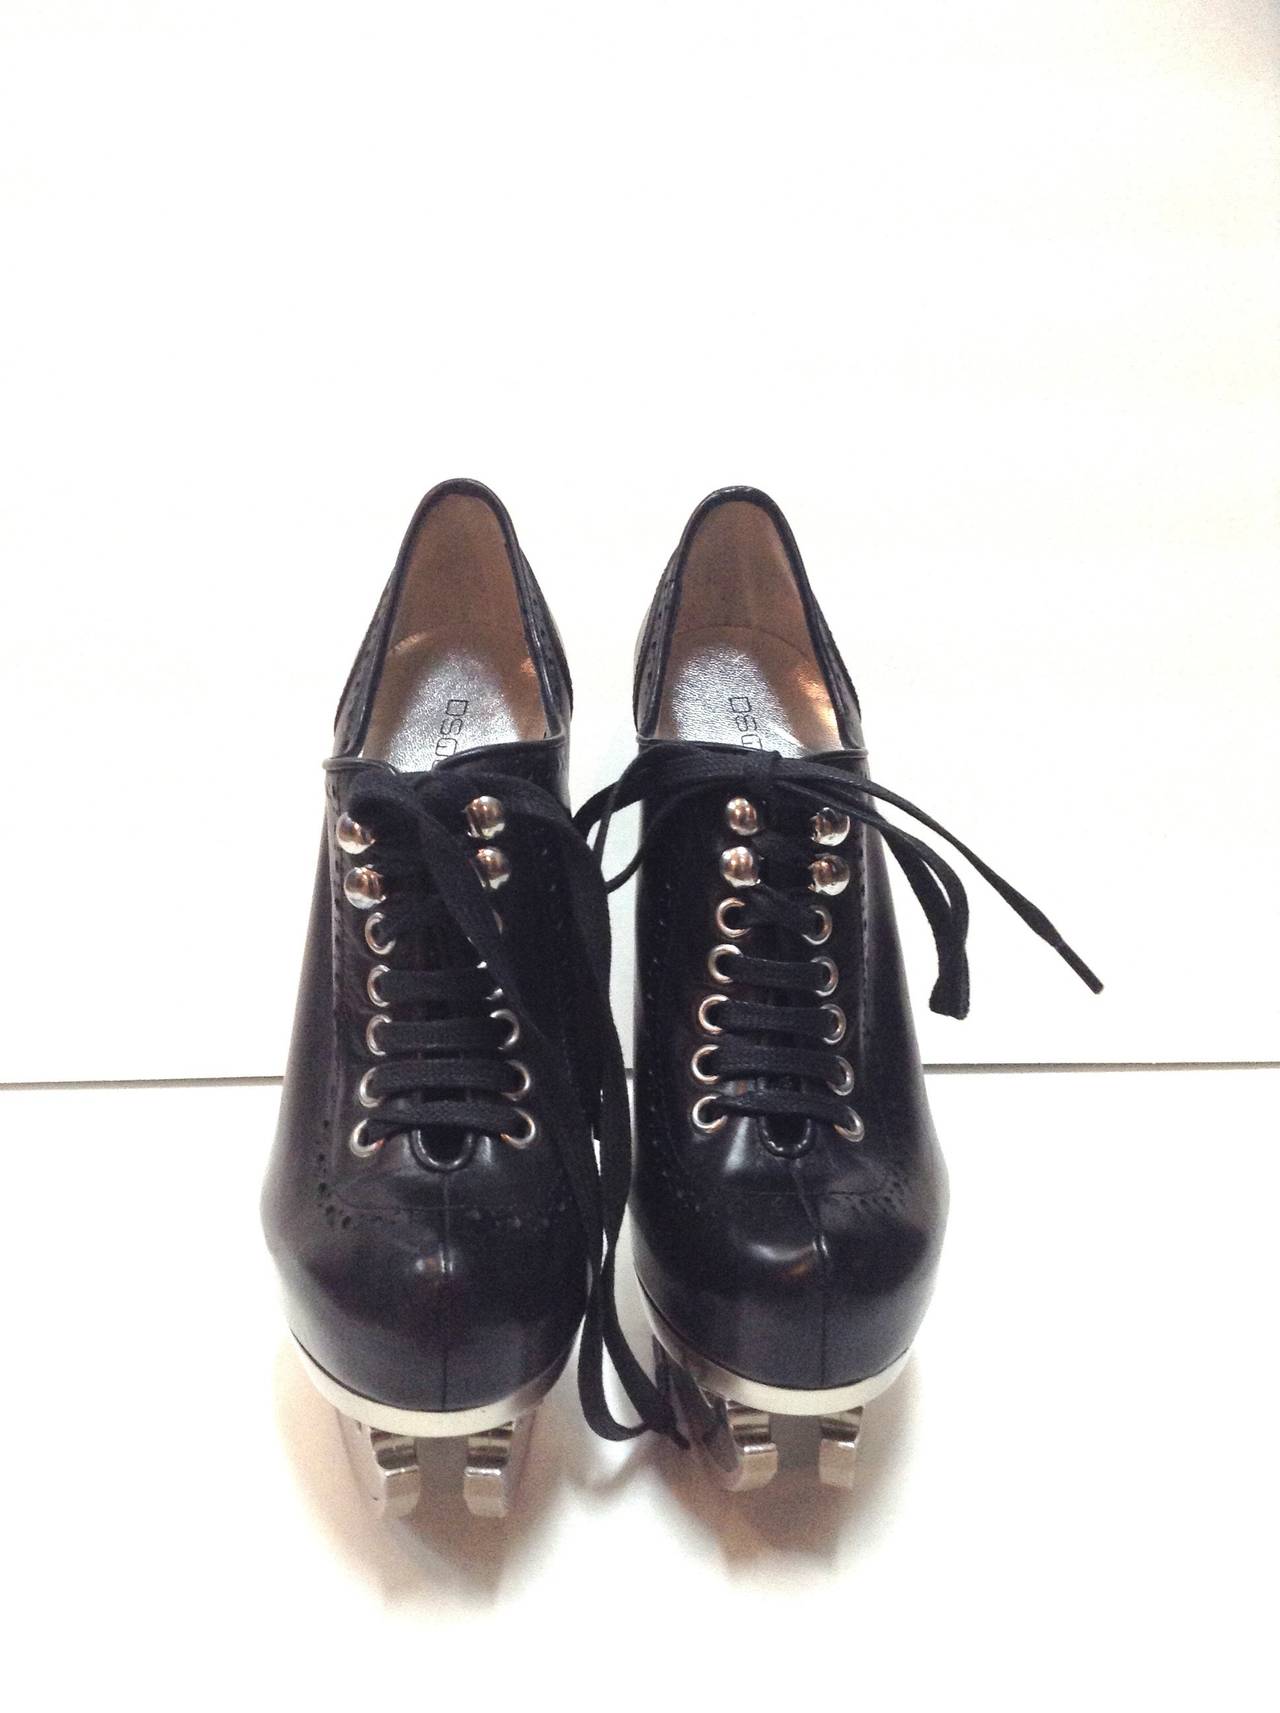 2013 DSqaured runway ice Skate size 38 In New Condition For Sale In Westmount, Quebec